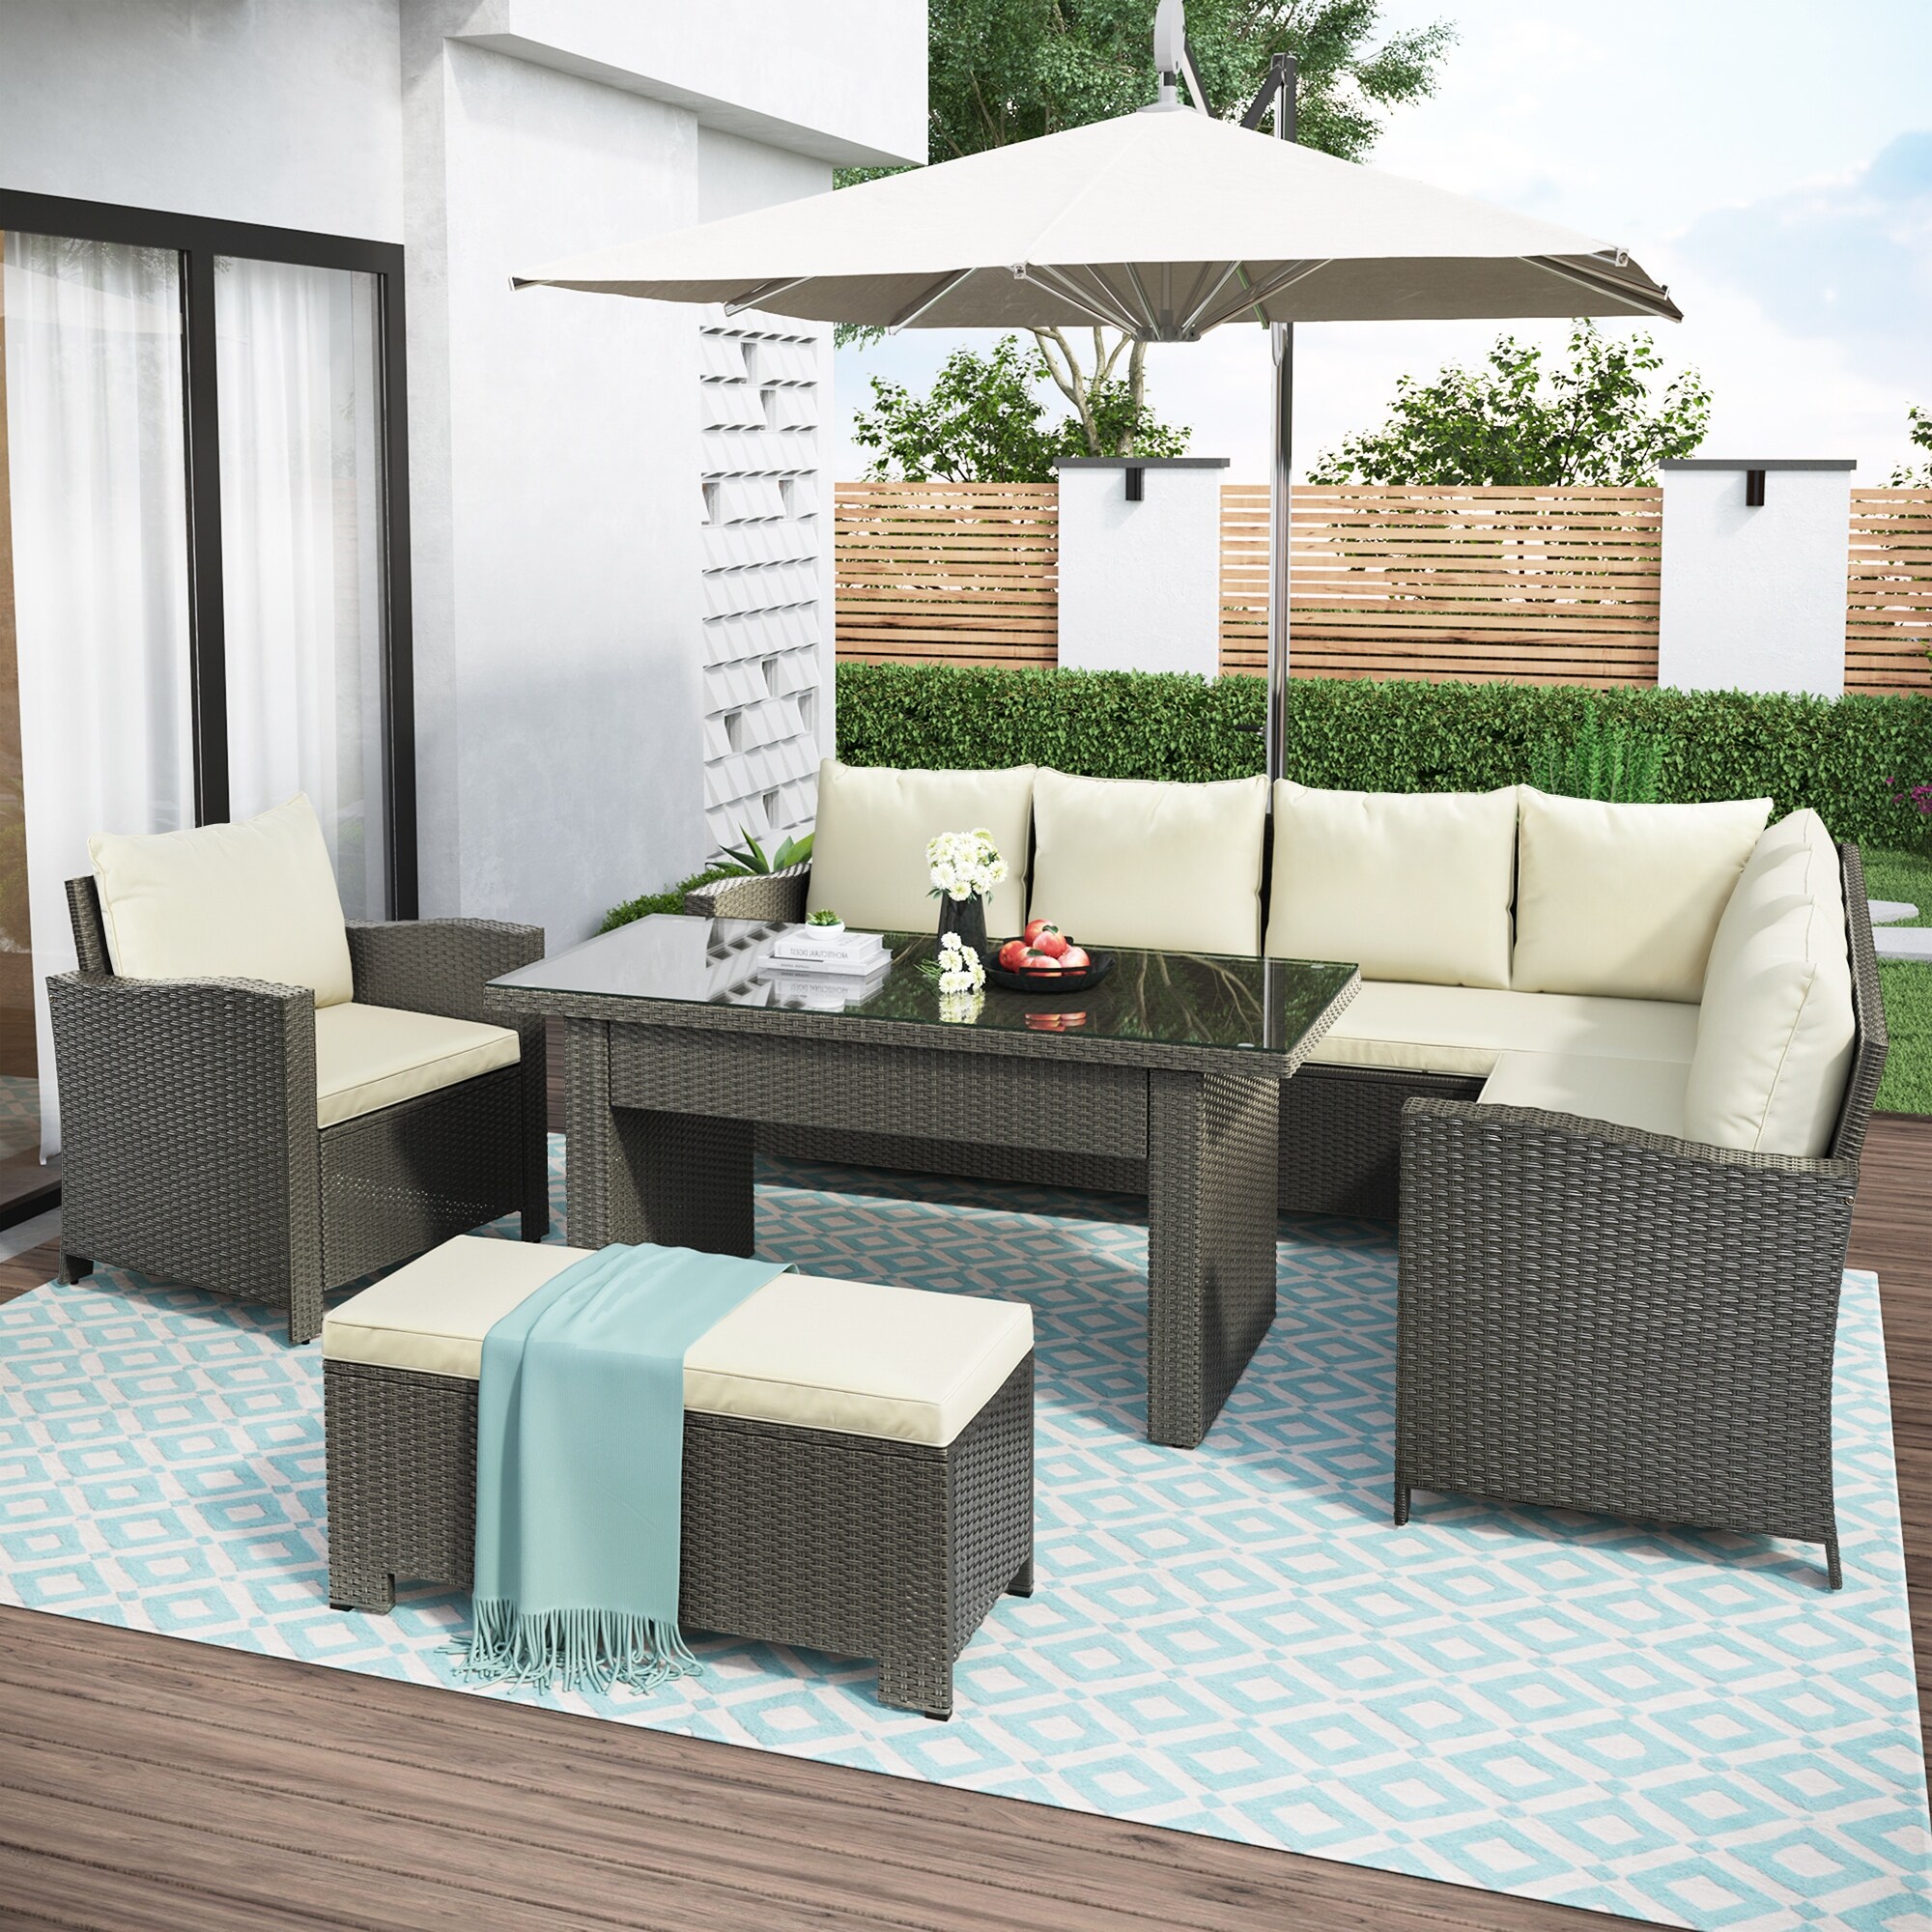 White 6-piece Outdoor Patio Furniture Sectional Sofa Set With Dining Table  Chairs  And Bench  With Comfortable Cushions